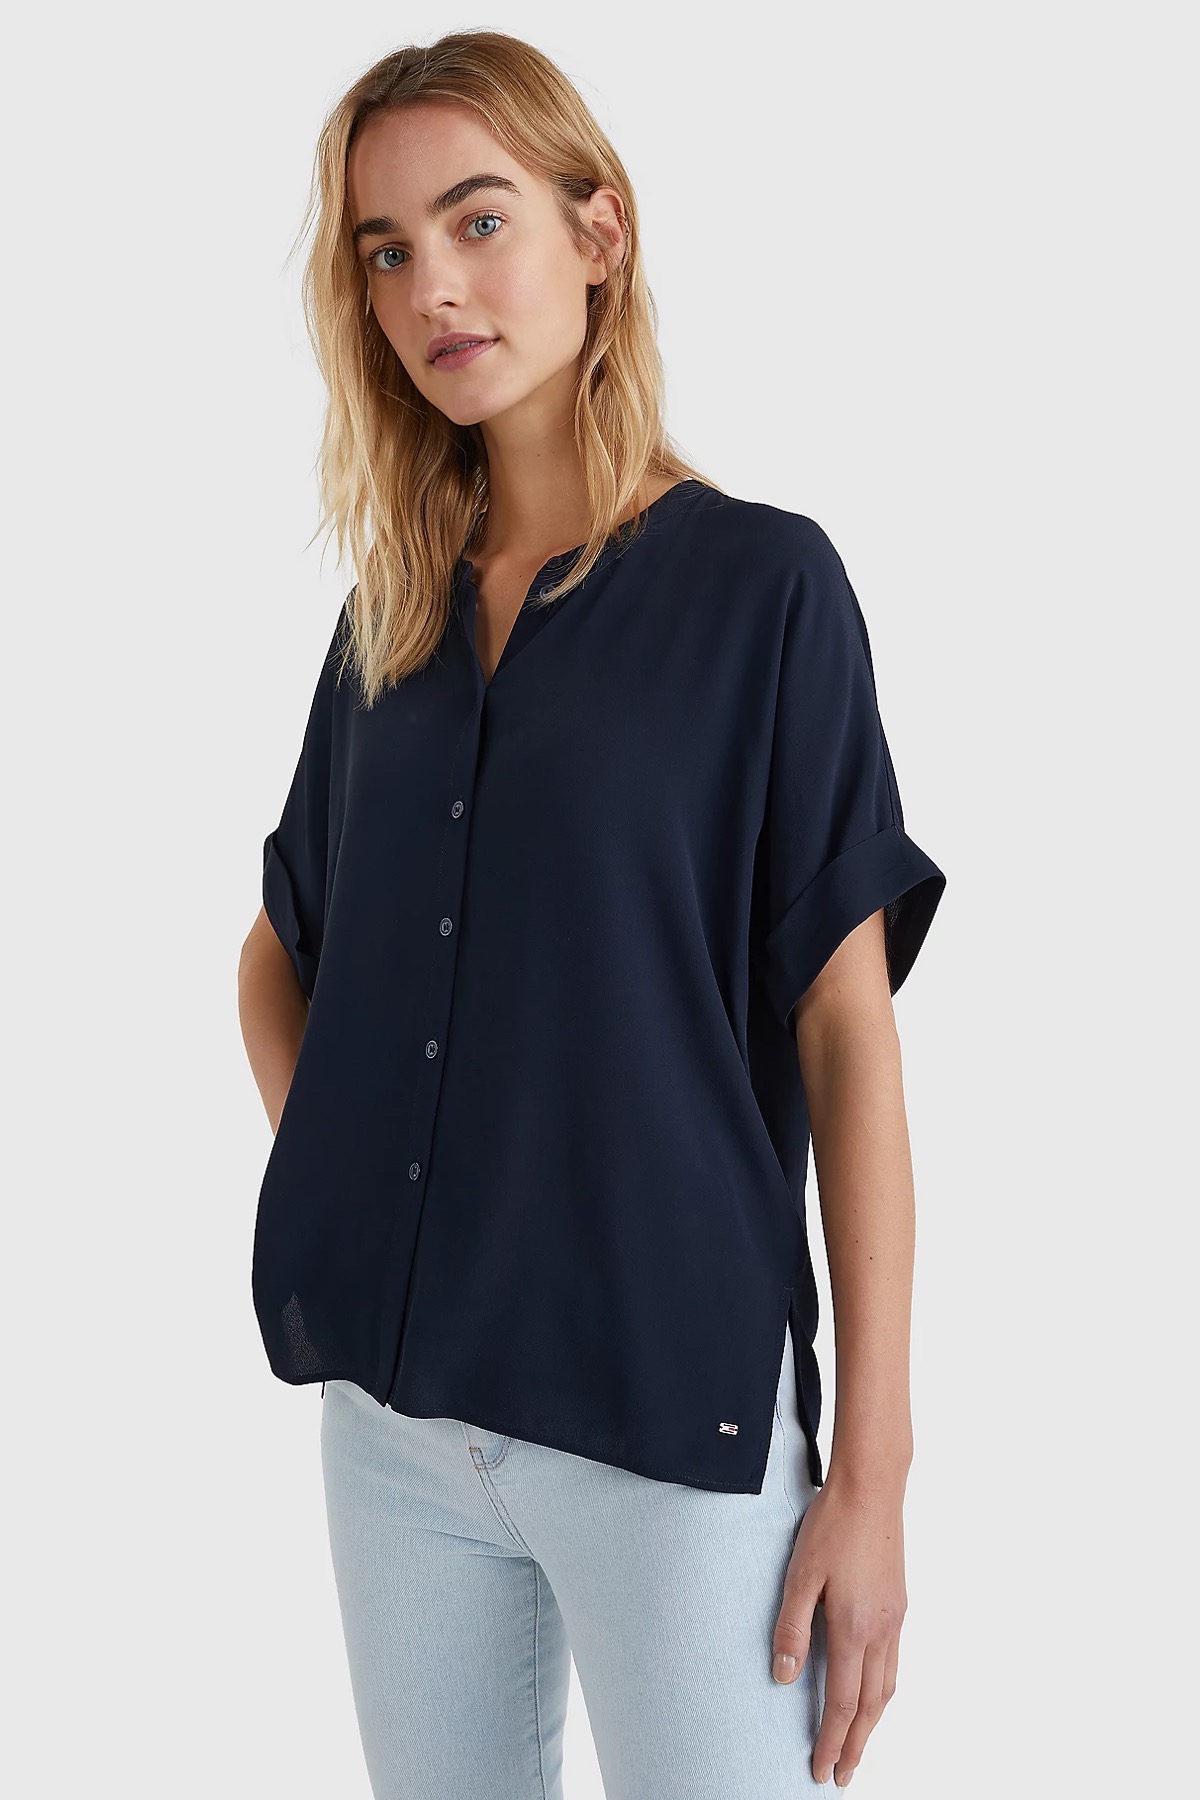 TOMMY HILFIGER BLUSA RELAXED FIT BLU 33463